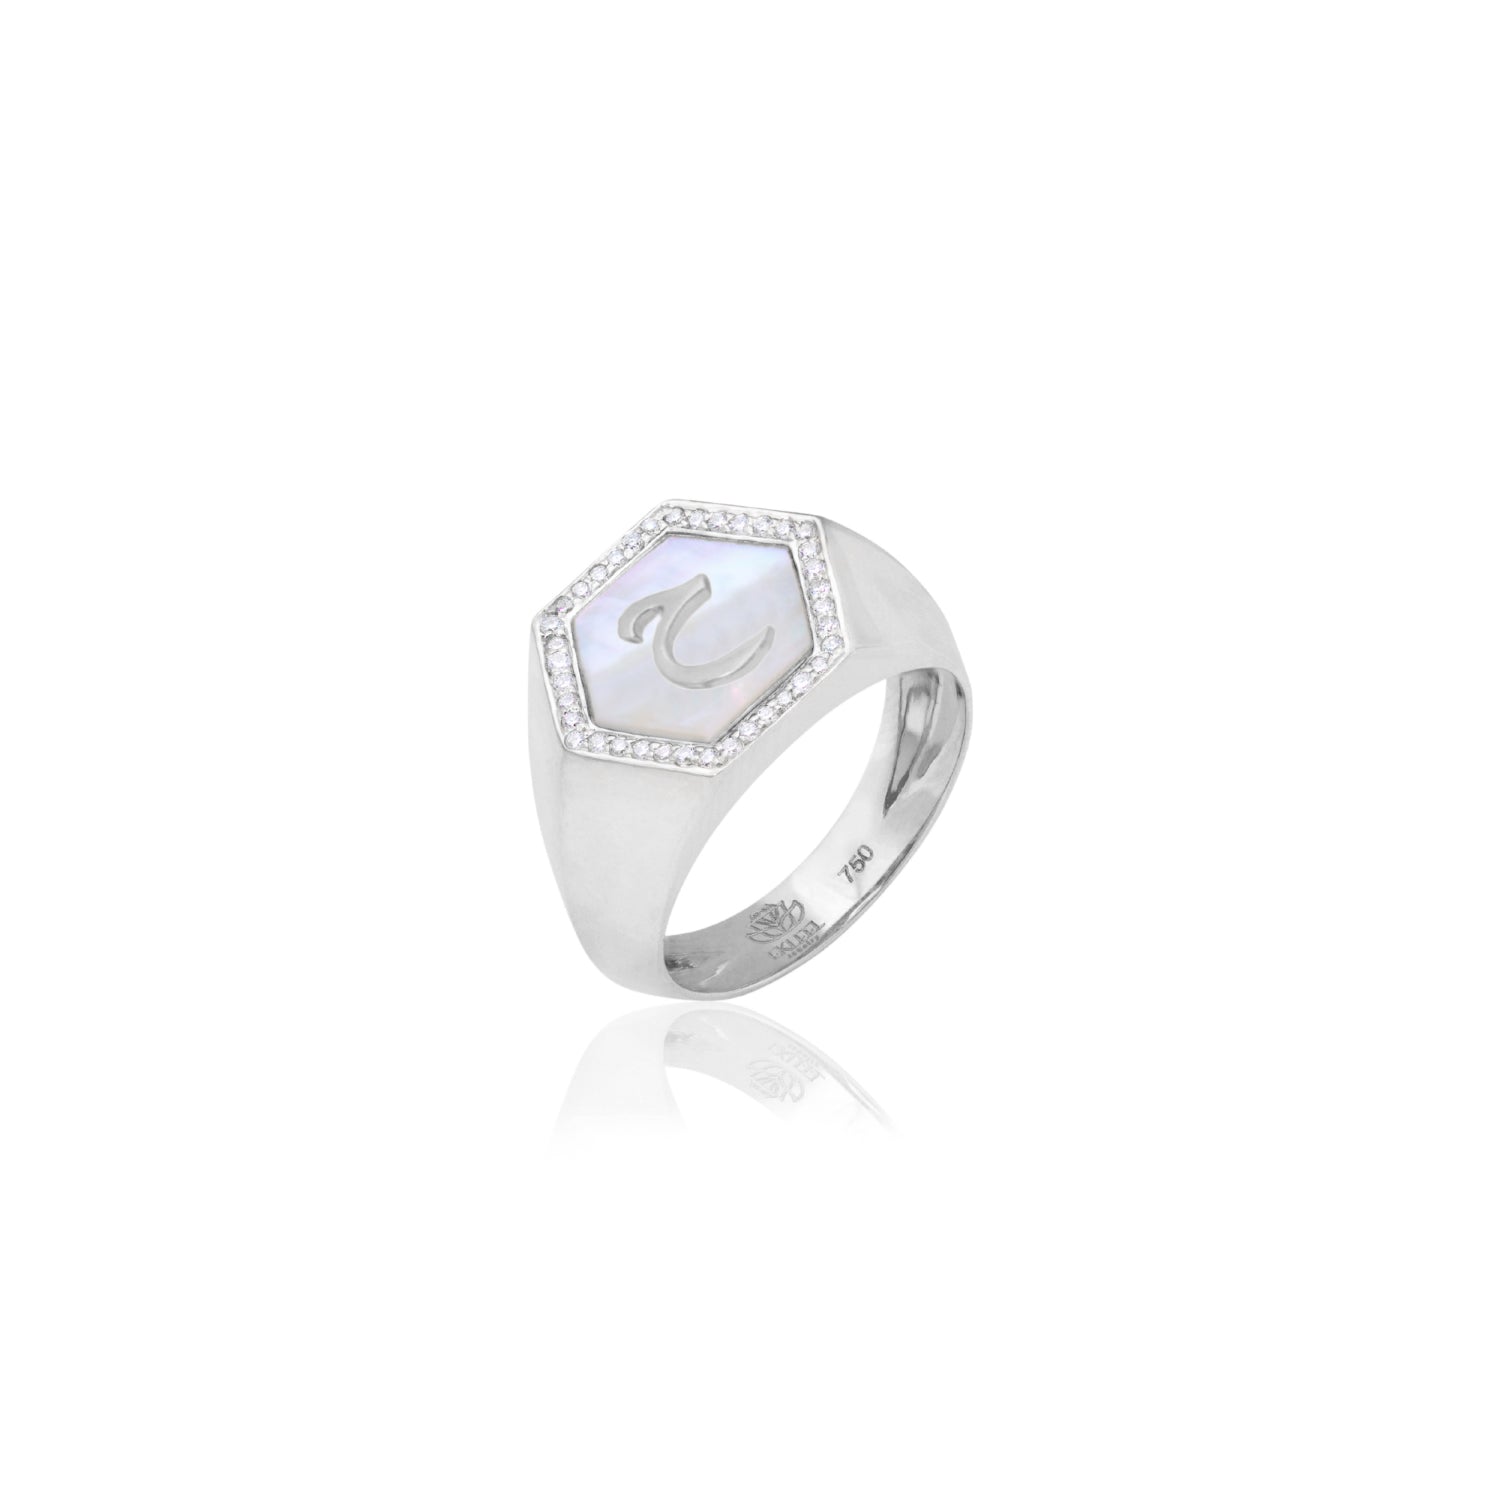 Qamoos 2.0 Letter ح White Mother of Pearl and Diamond Signet Ring in White Gold